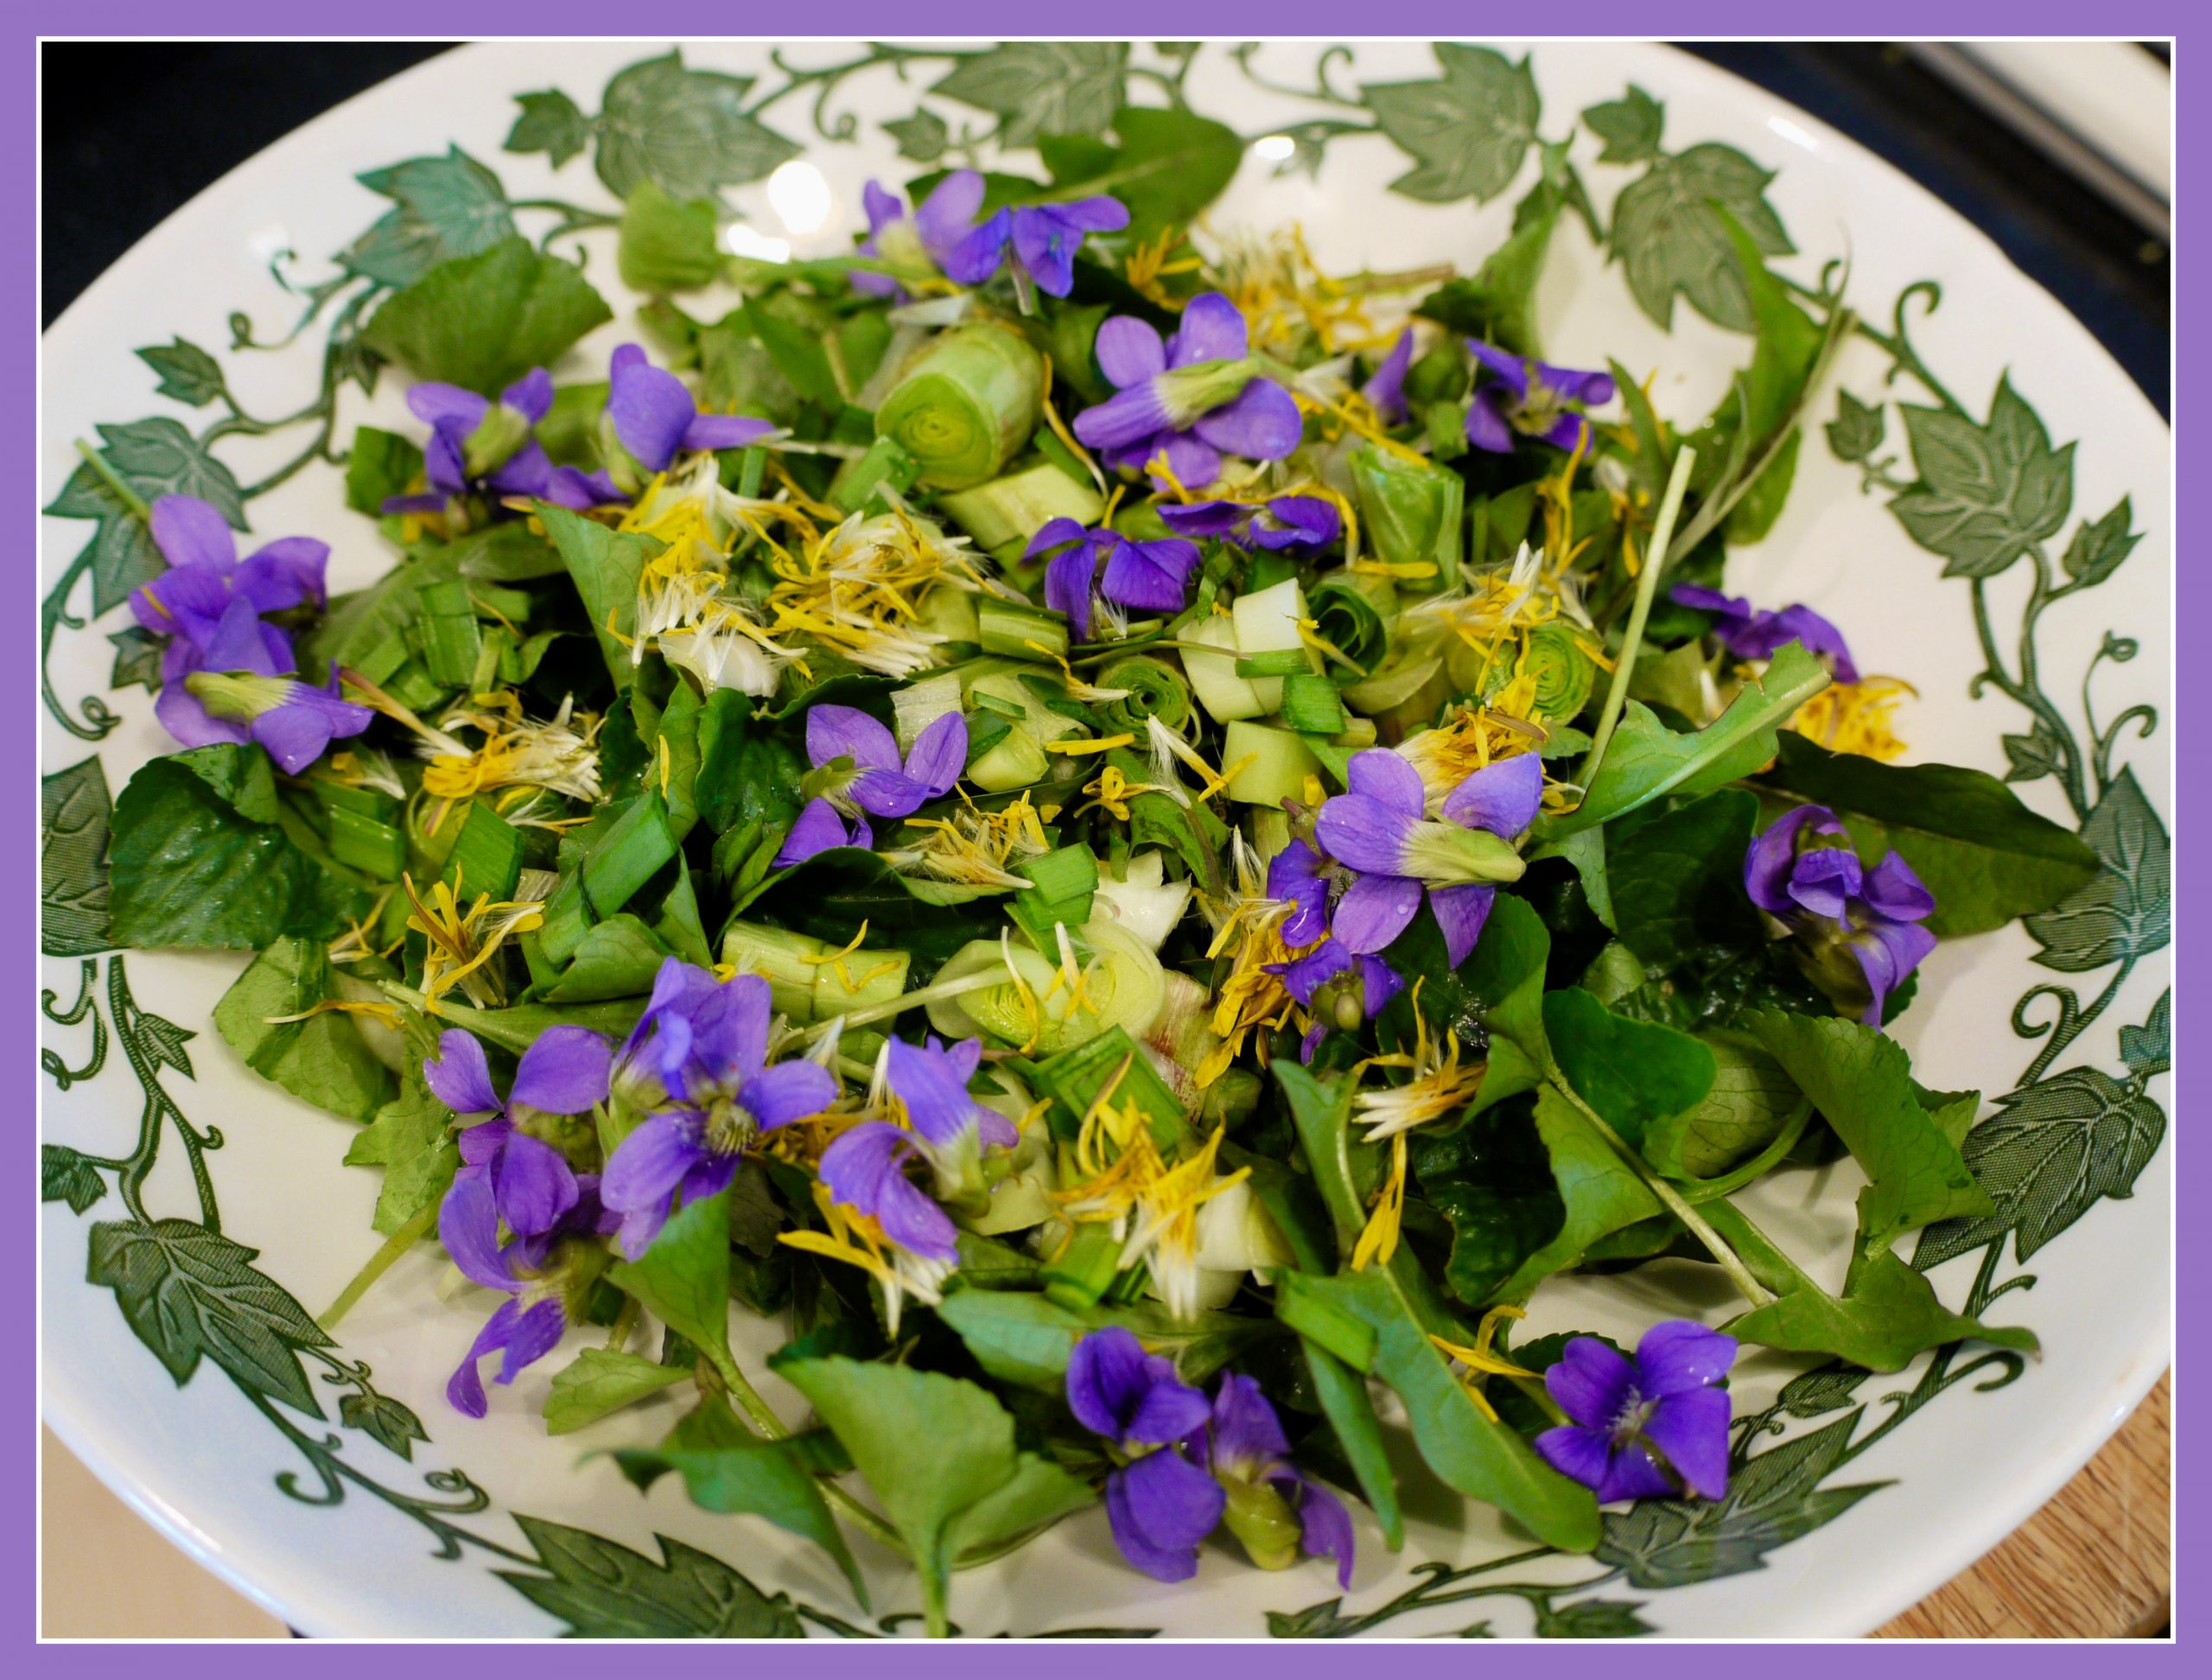 https://learningandyearning.com/wp-content/uploads/2016/04/salad-with-flowers-1-scaled.jpg